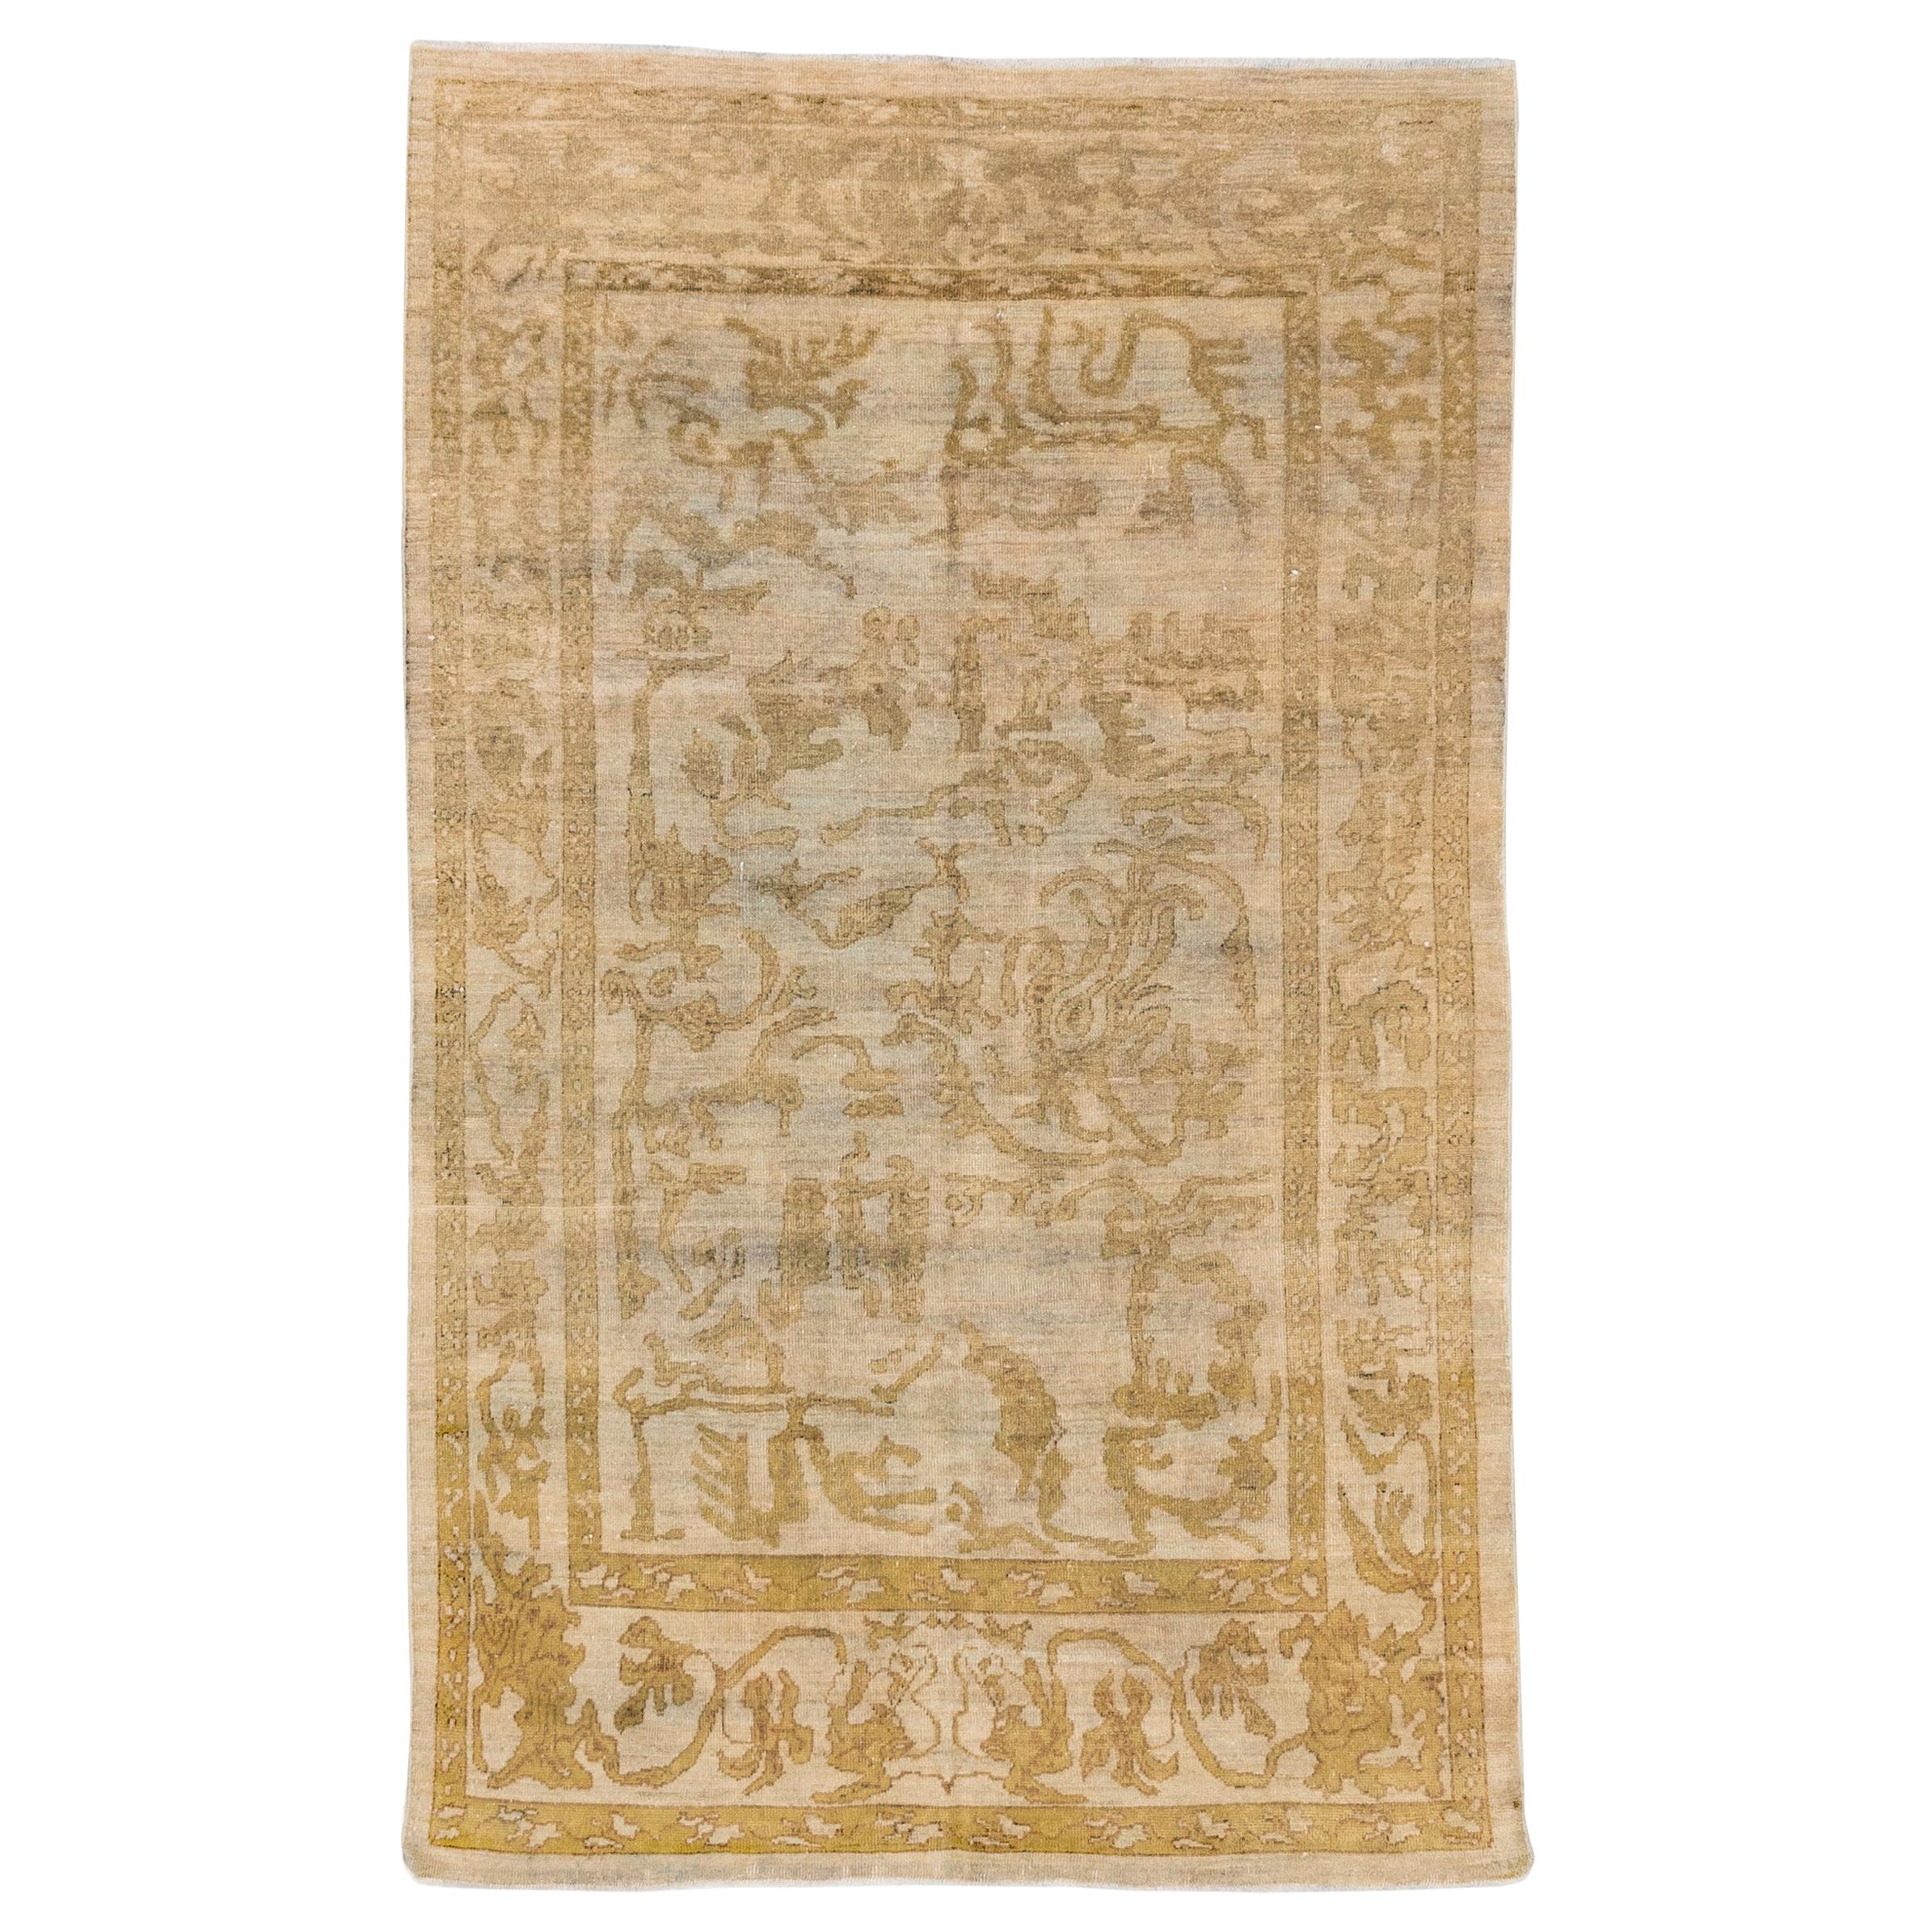 New Turkish Sultanabad Style Rug with Brown and Gold Botanical Motifs